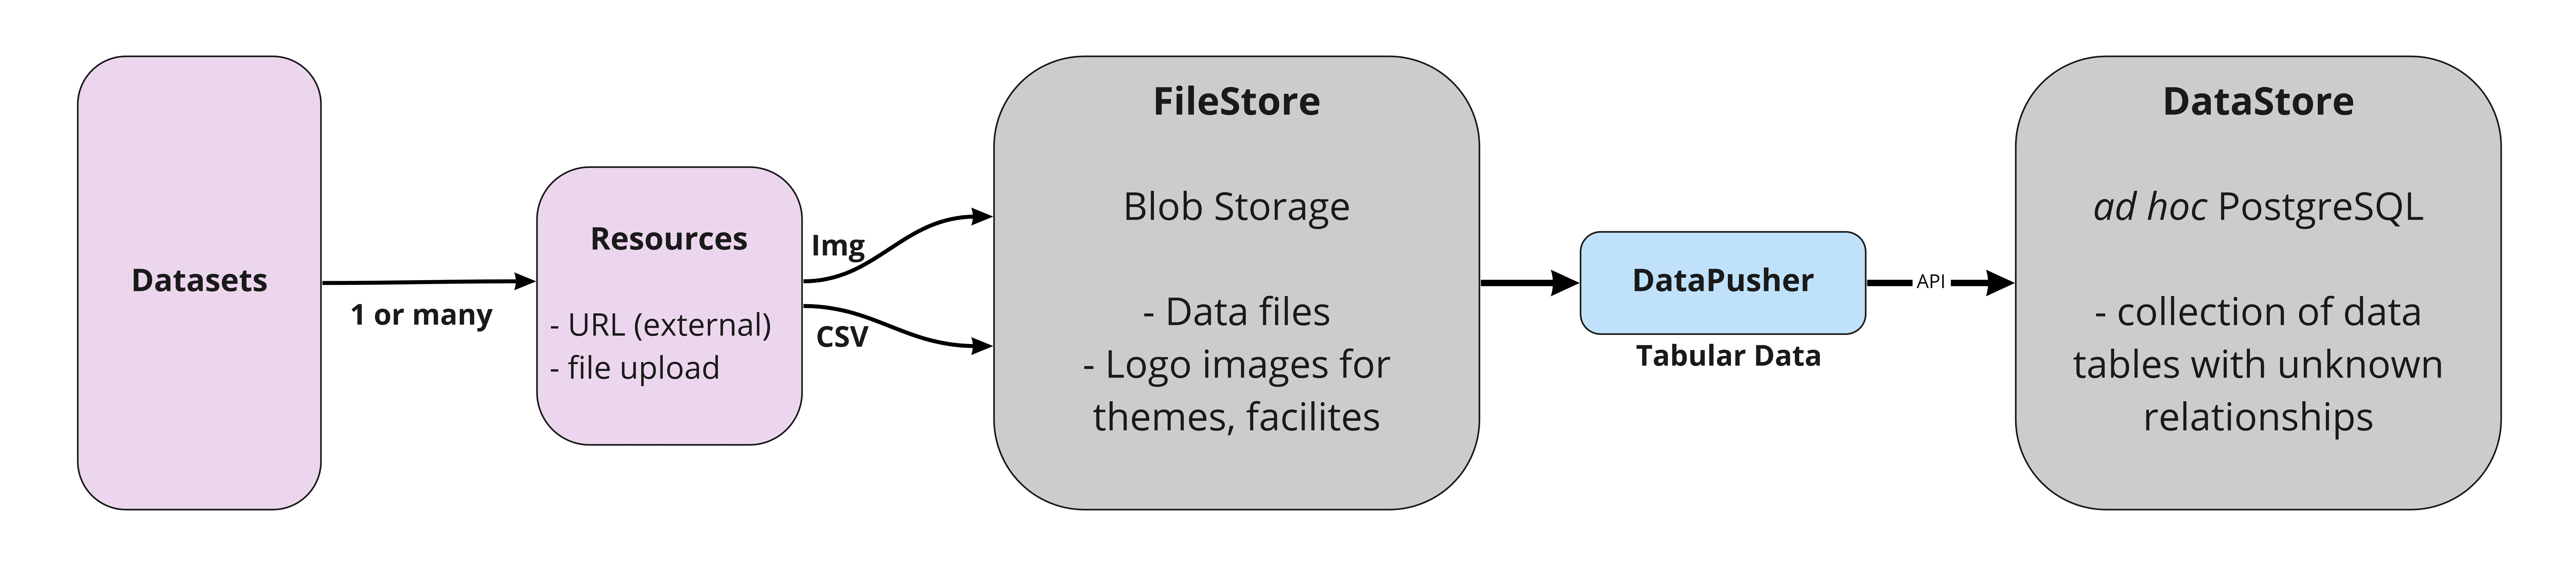 Diagram showing CKAN database structure, datasets contain resources, resources which are sent to Filestore, if tabular data they are parsed by the Datapusher and sent to the DataStore